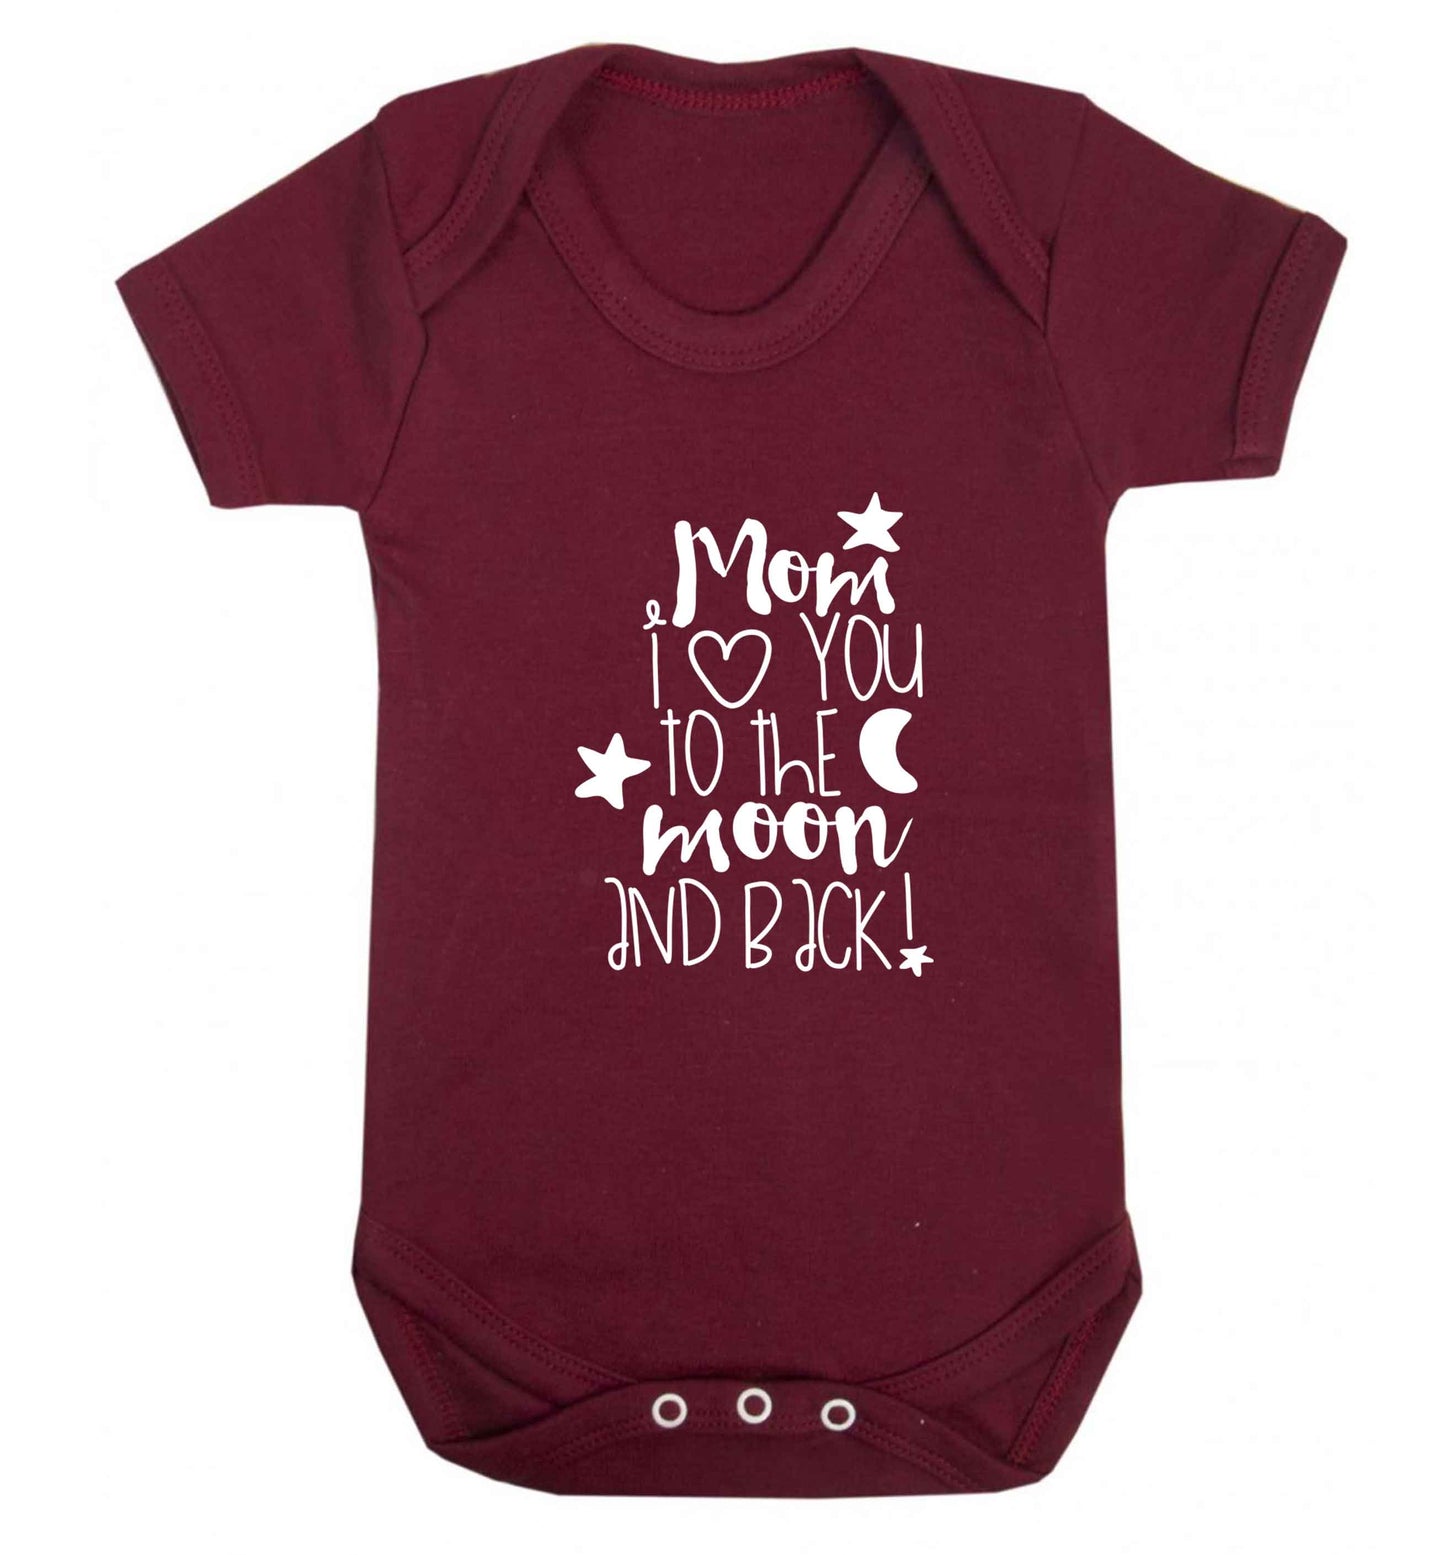 Mom I love you to the moon and back baby vest maroon 18-24 months